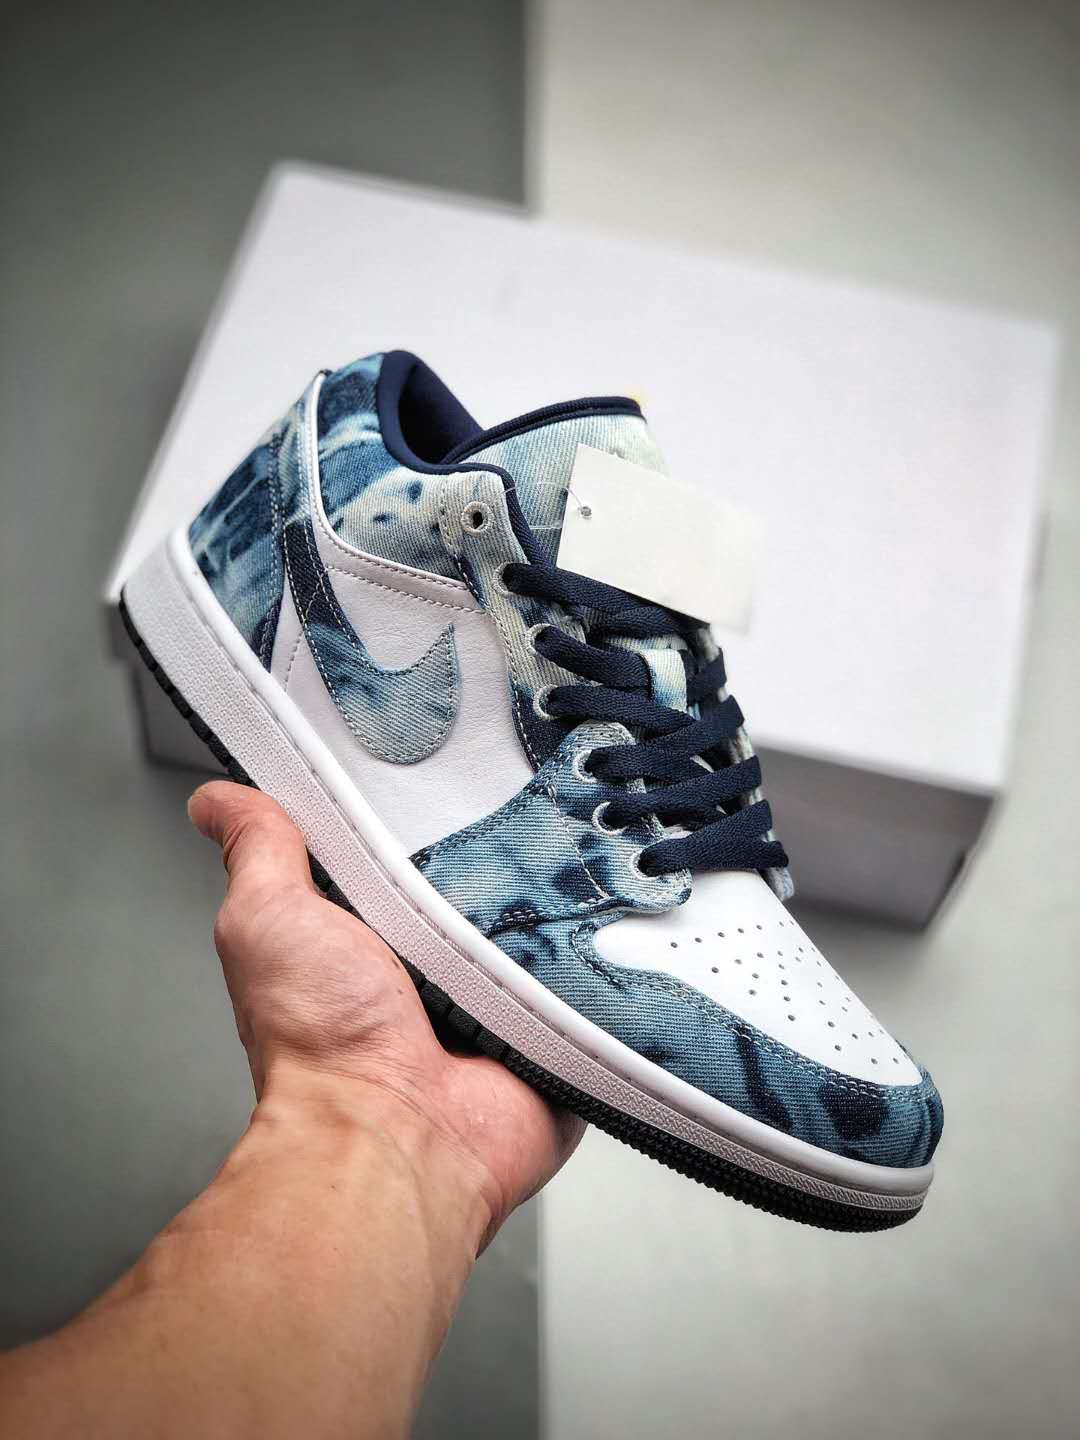 Air Jordan 1 Low SE 'Washed Denim' CZ8455-100 - Stylish and Classic Sneakers